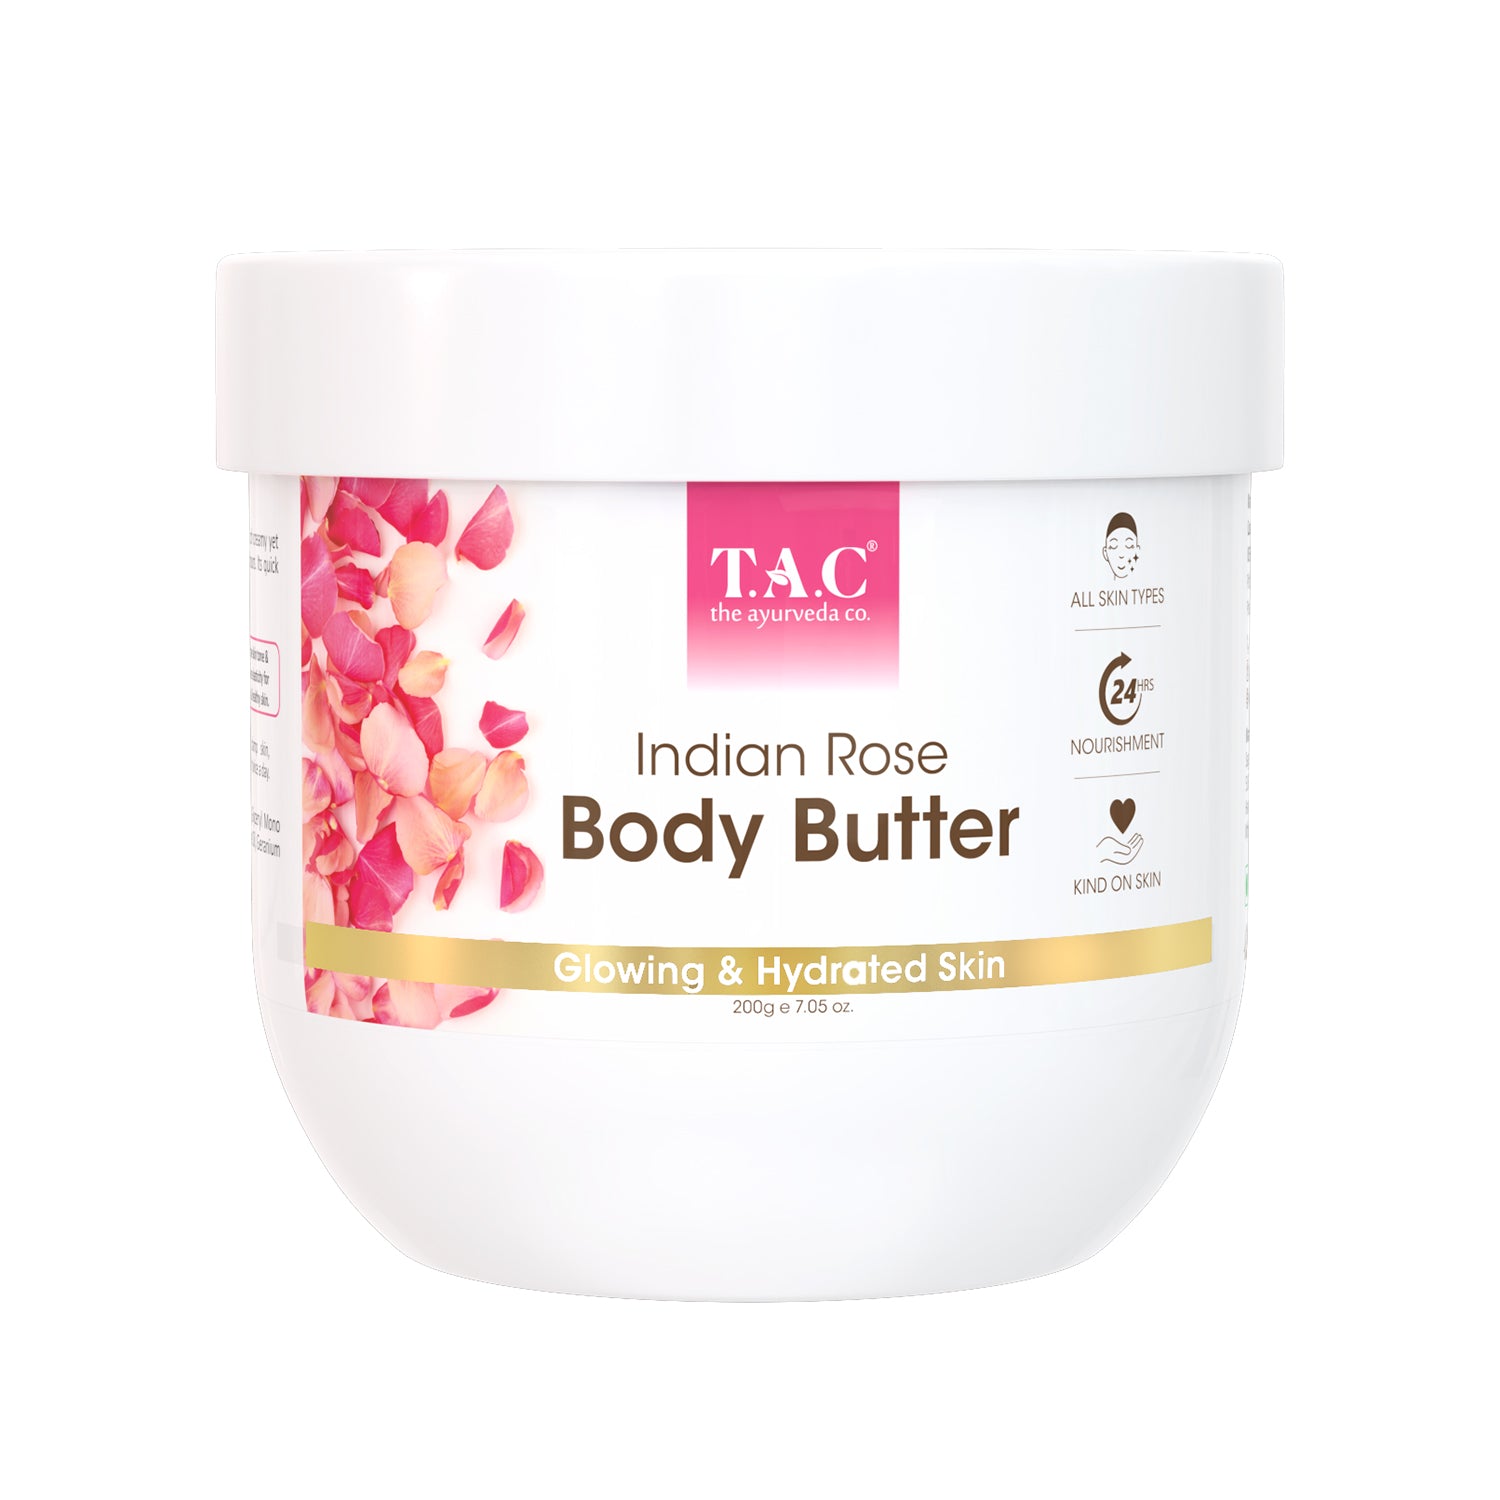 Indian Rose Body Butter